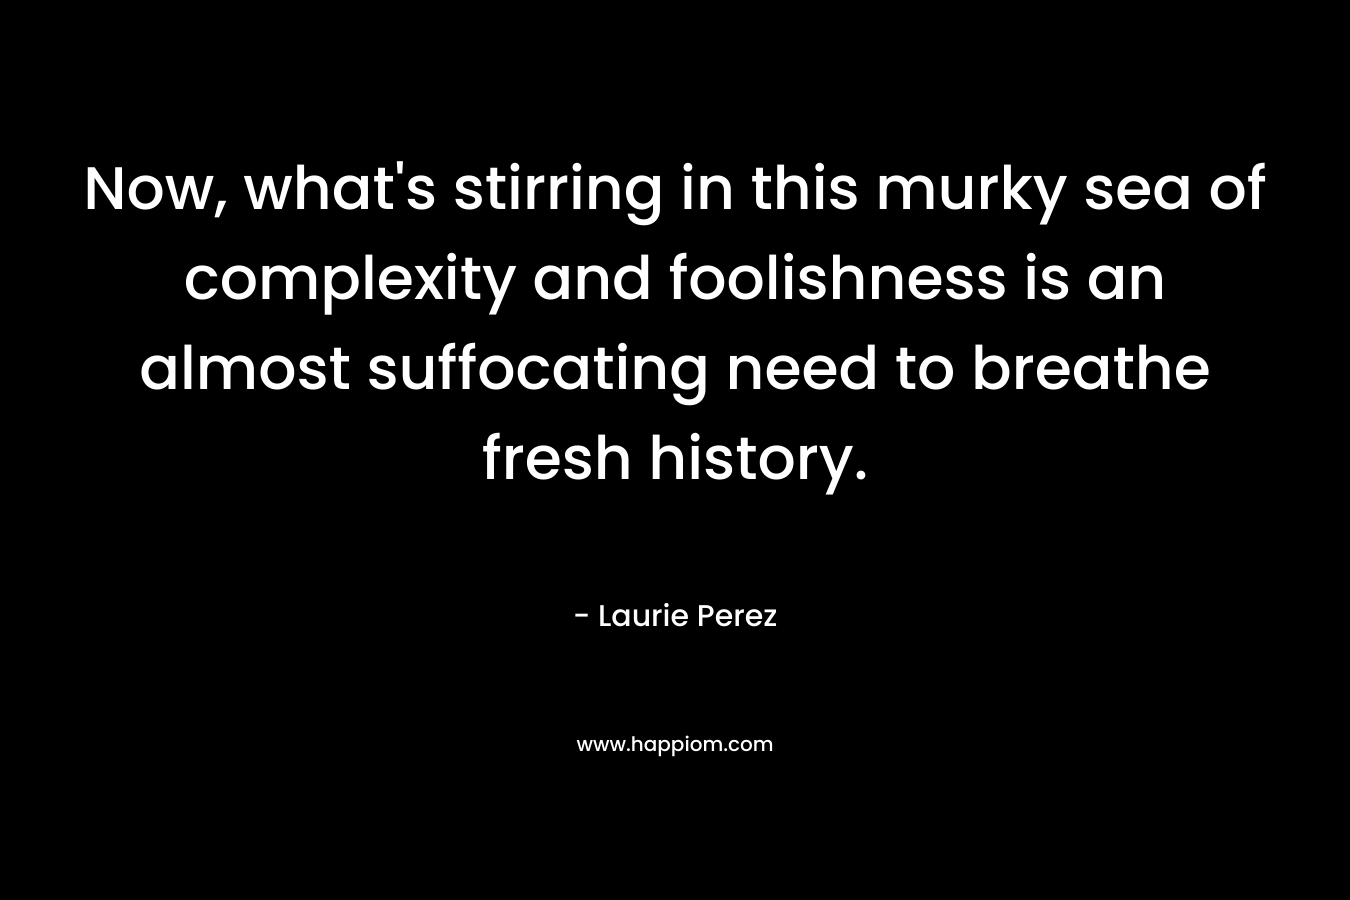 Now, what's stirring in this murky sea of complexity and foolishness is an almost suffocating need to breathe fresh history.